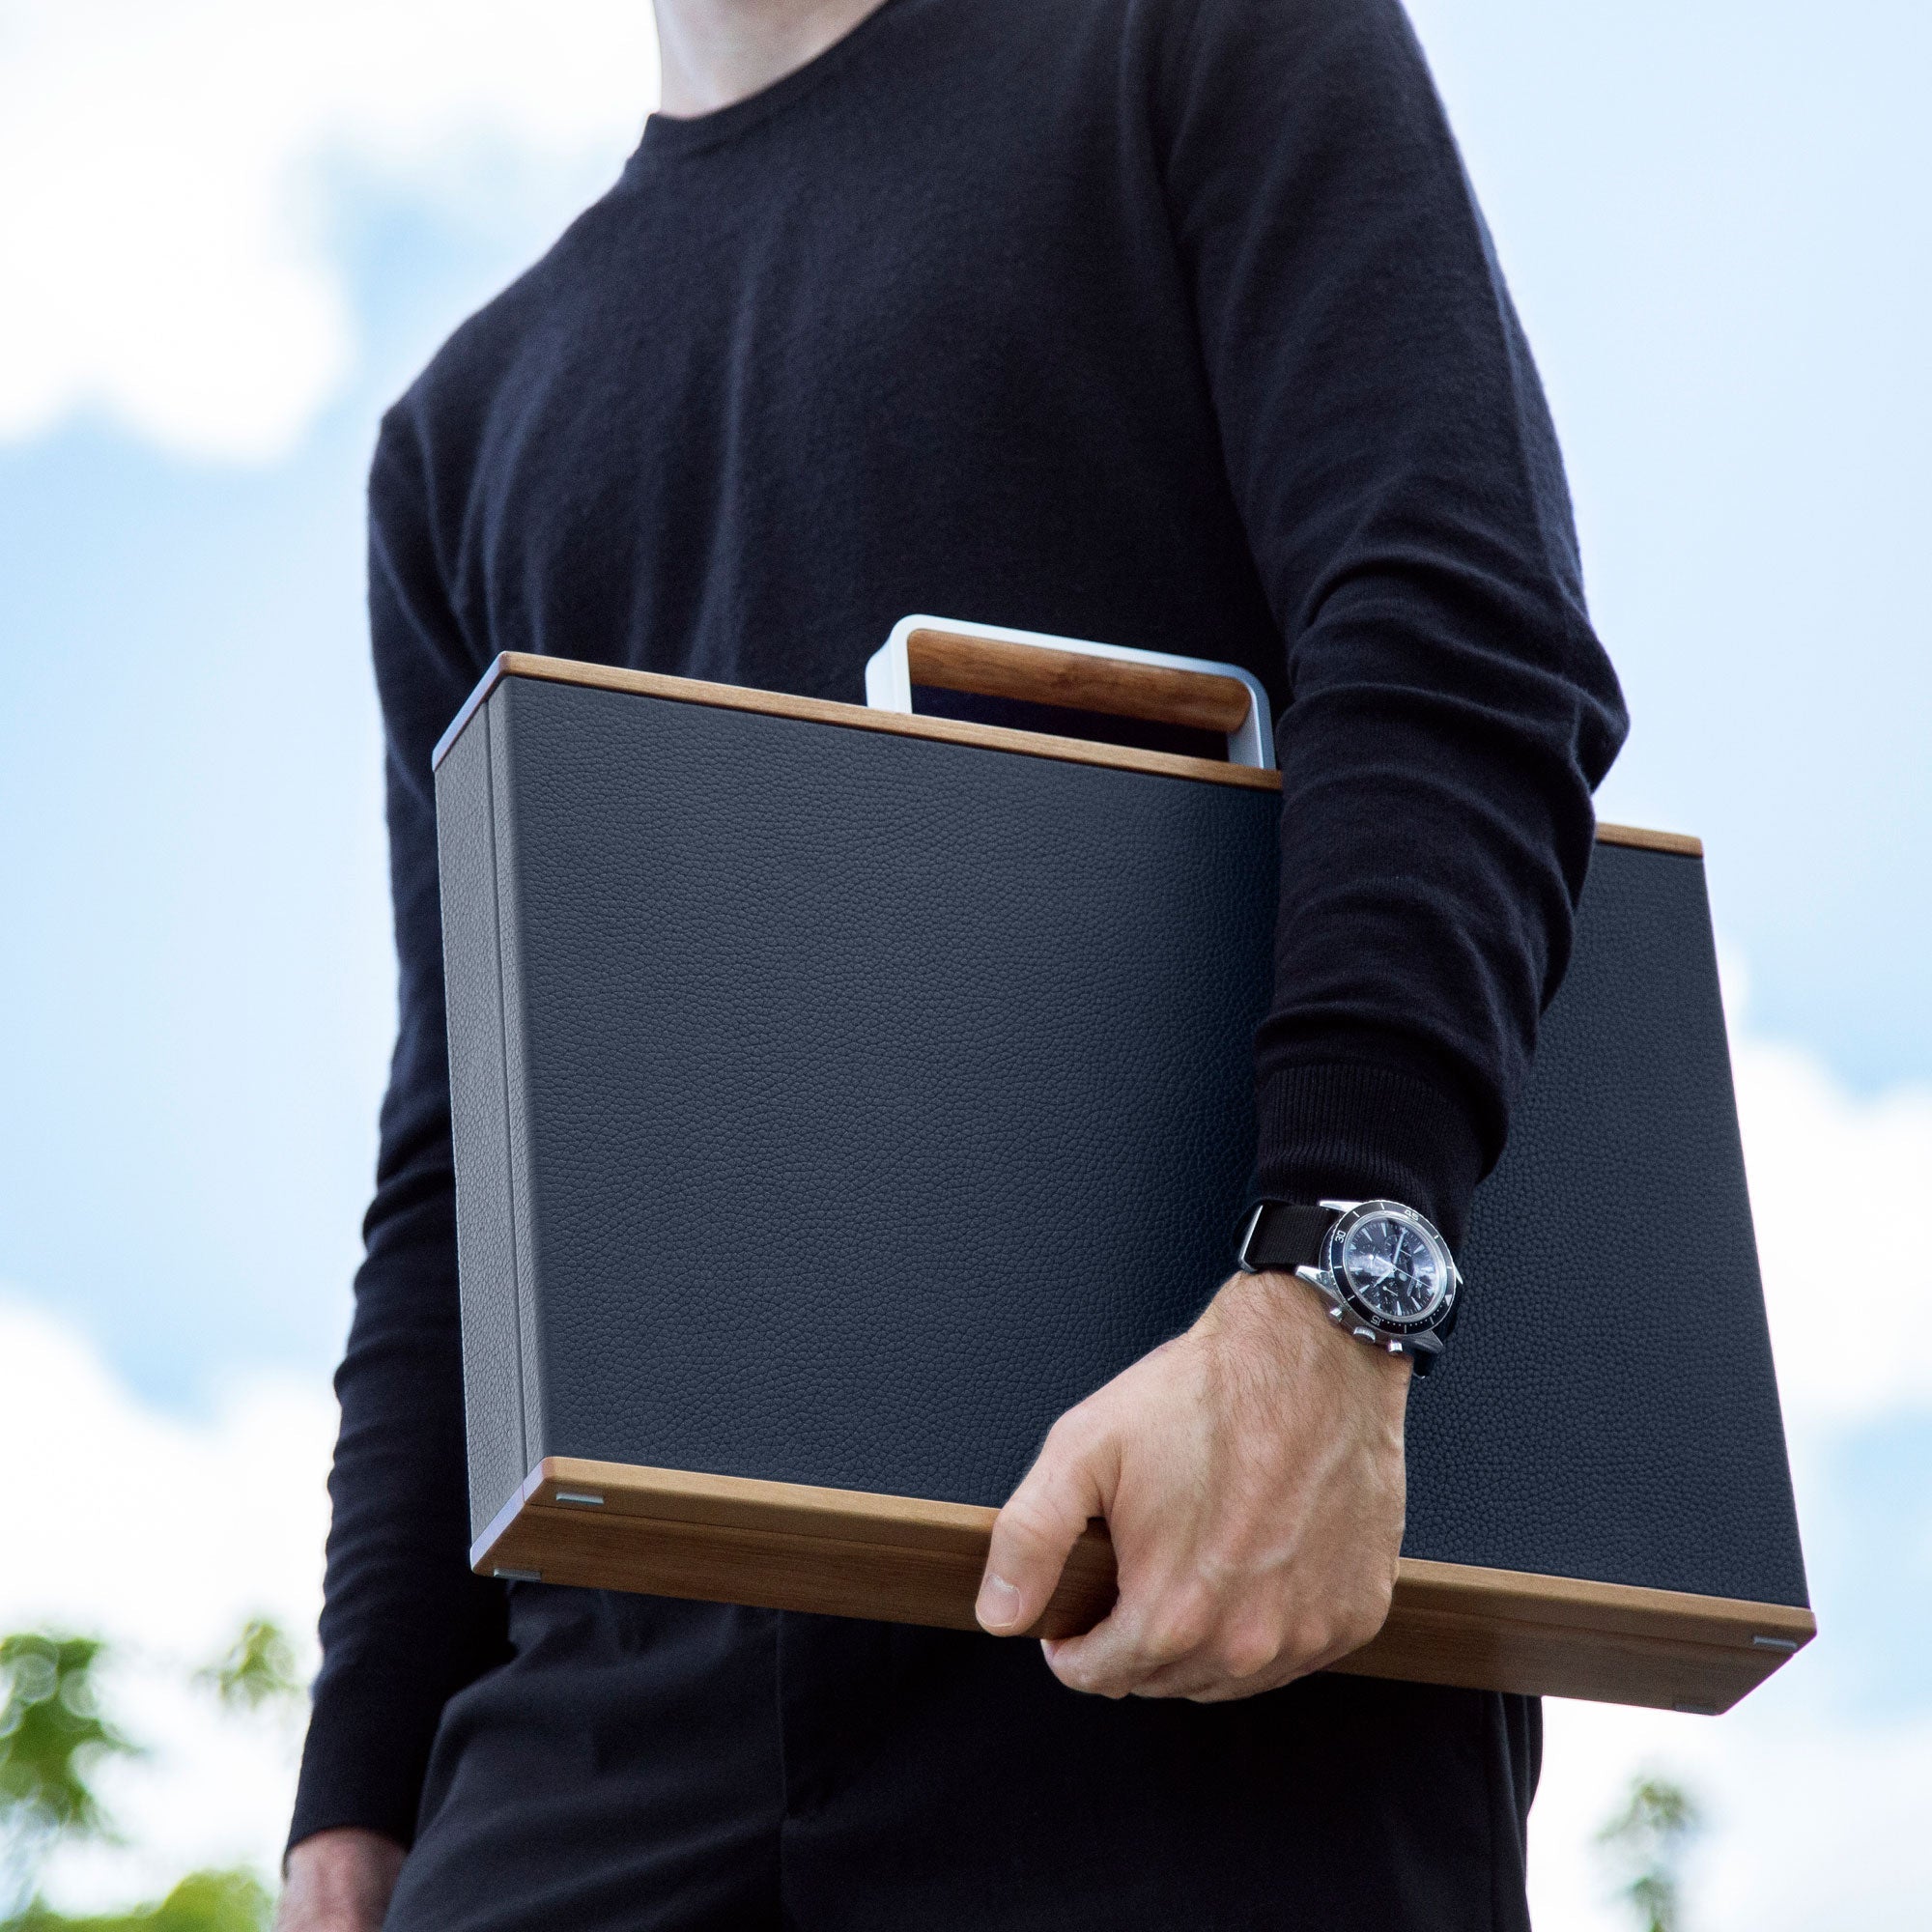 Lifestyle shot of luxury watch briefcase made from sustainable recycled wood being held by business man